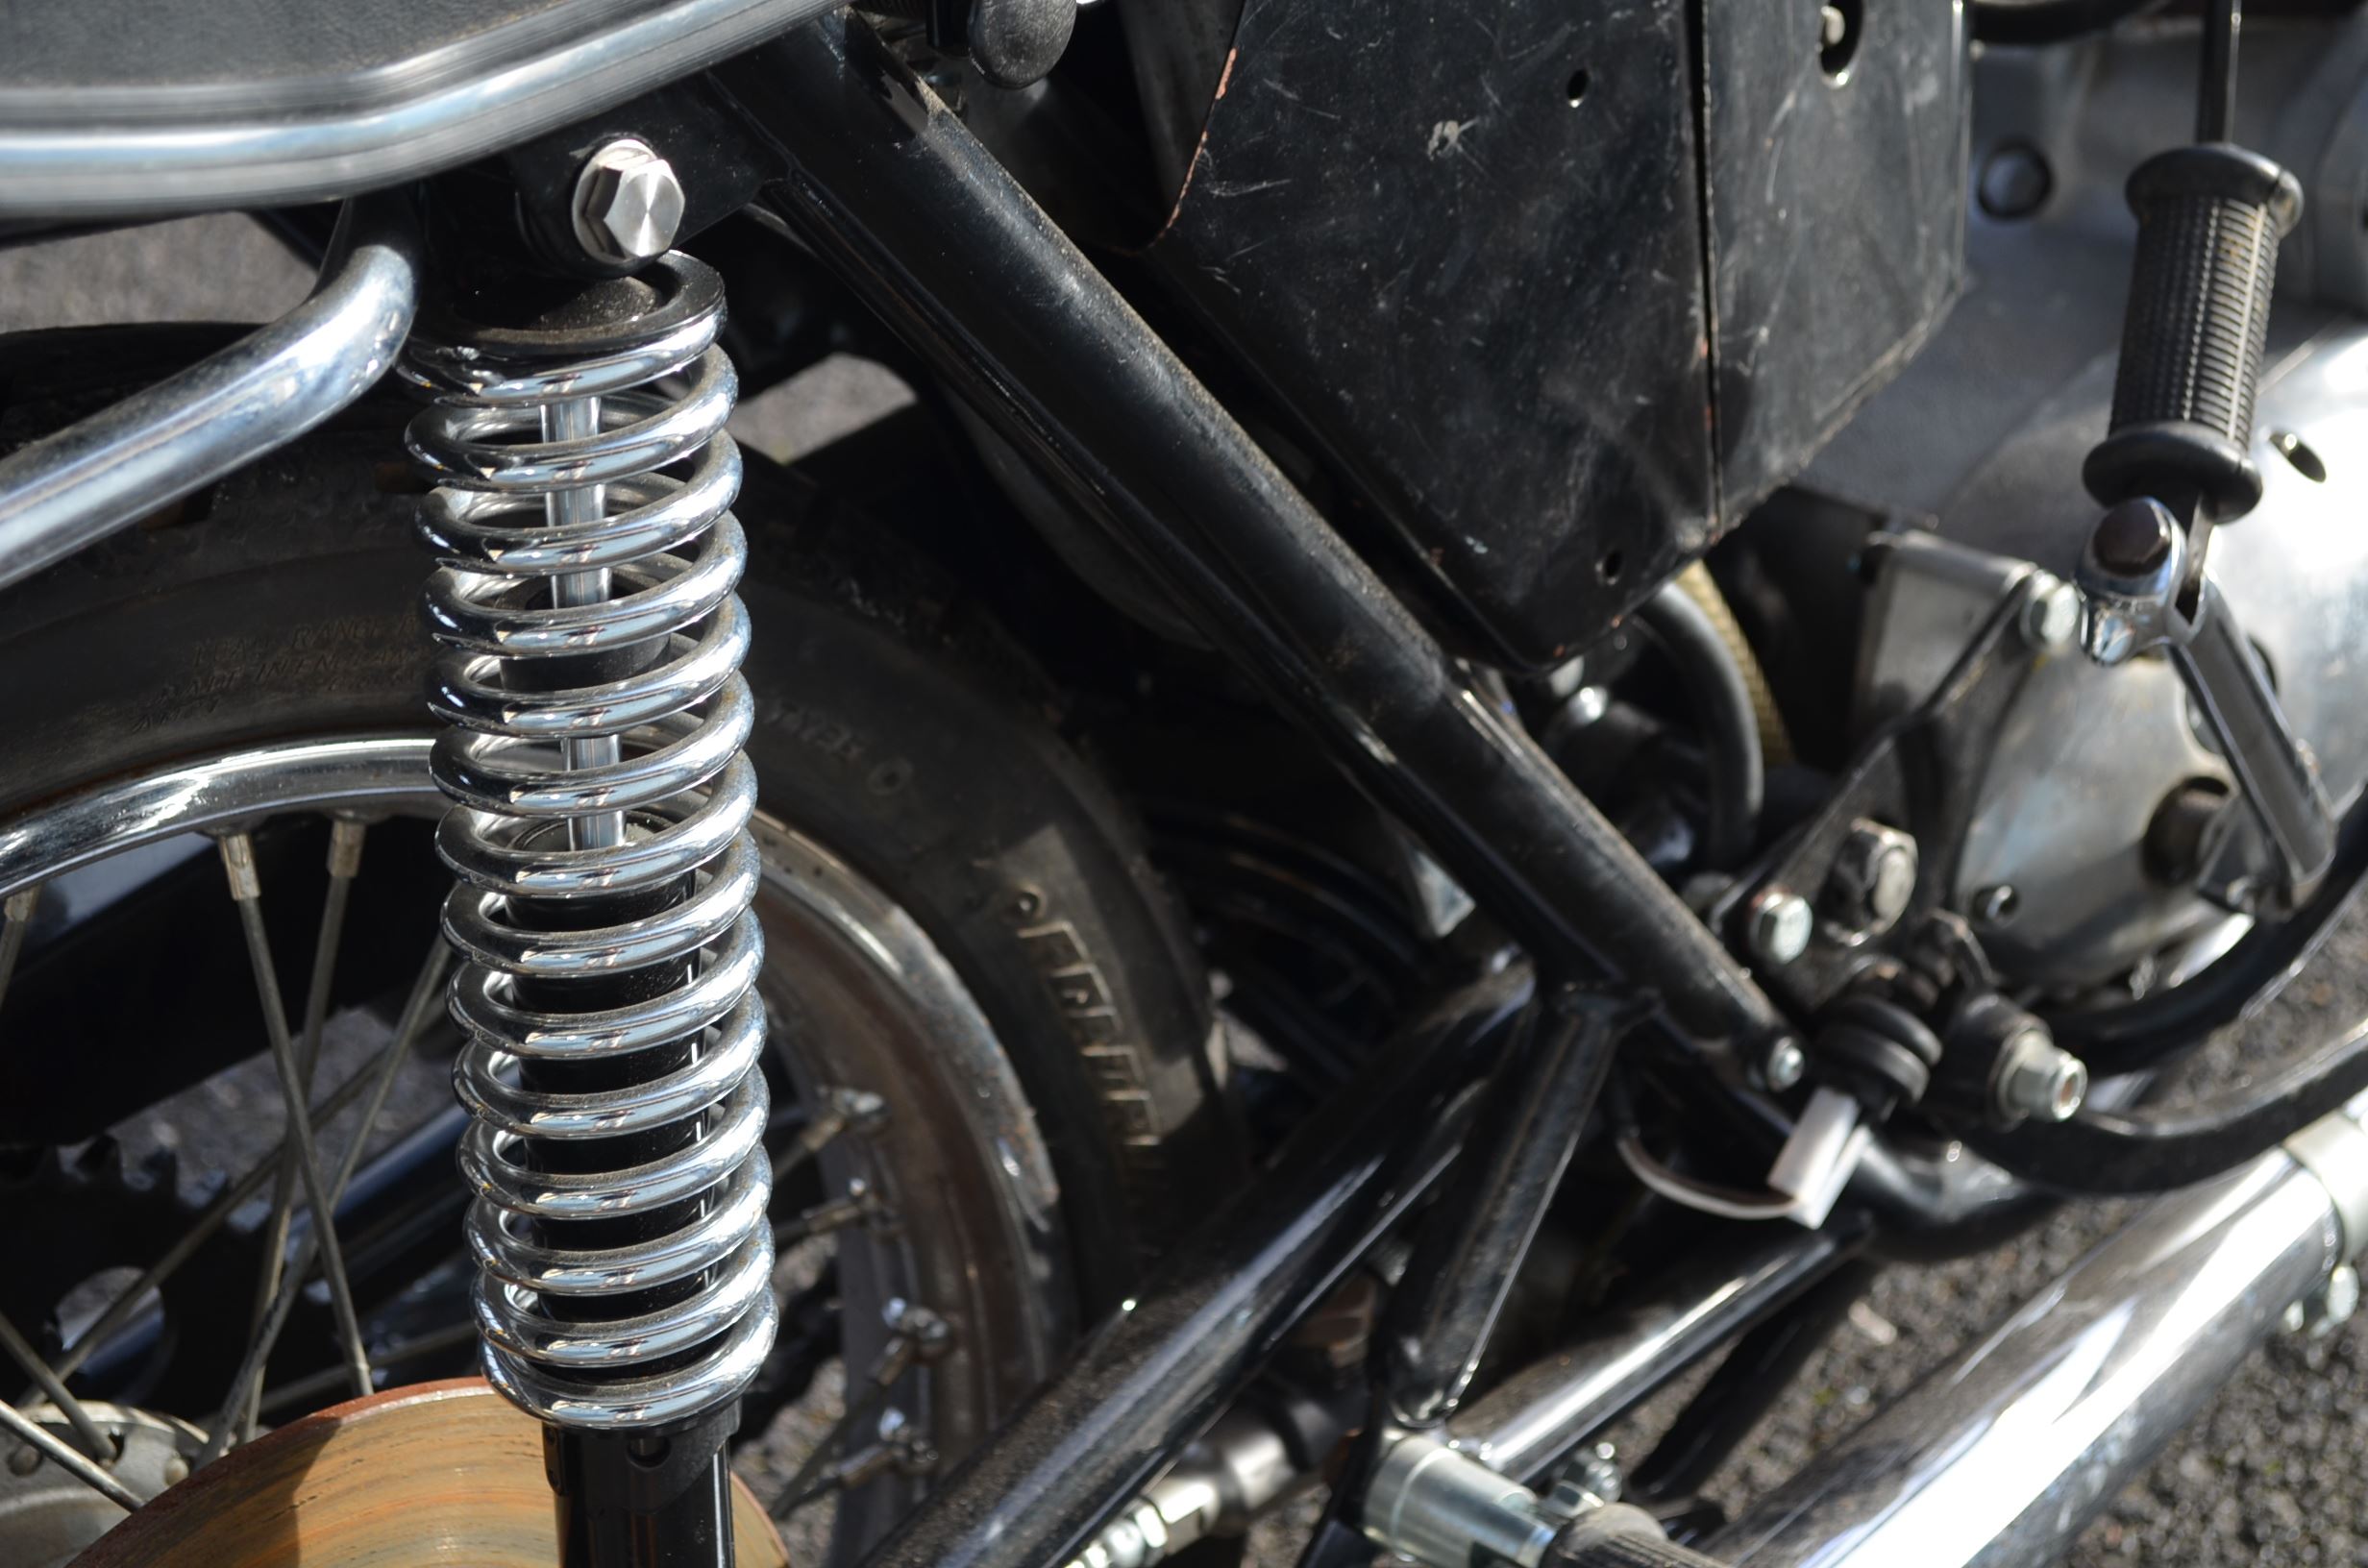 Triumph bonneville customised with later parts gmt1xzufguqkq34dxinxs